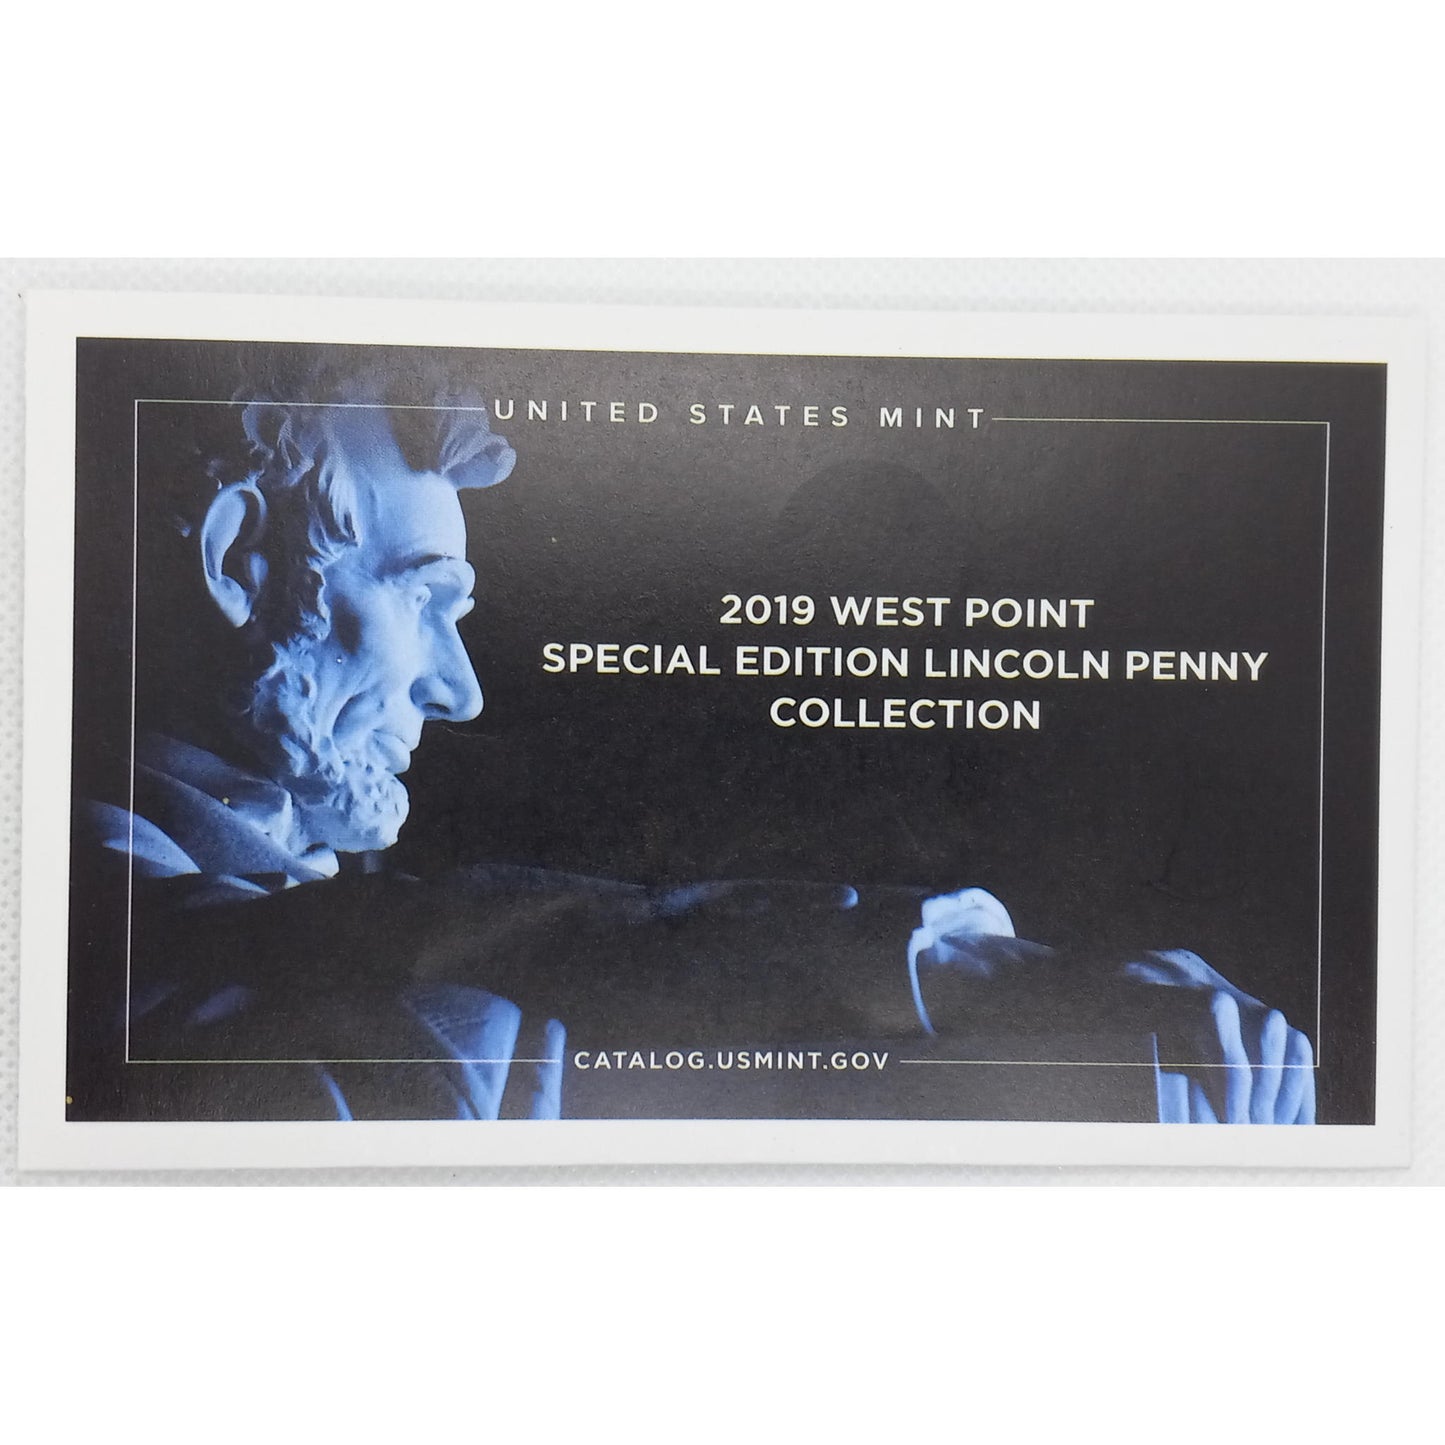 2019 United States Mint PROOF SET ( CLAD ) with PROOF W CENT With OGP & COA!